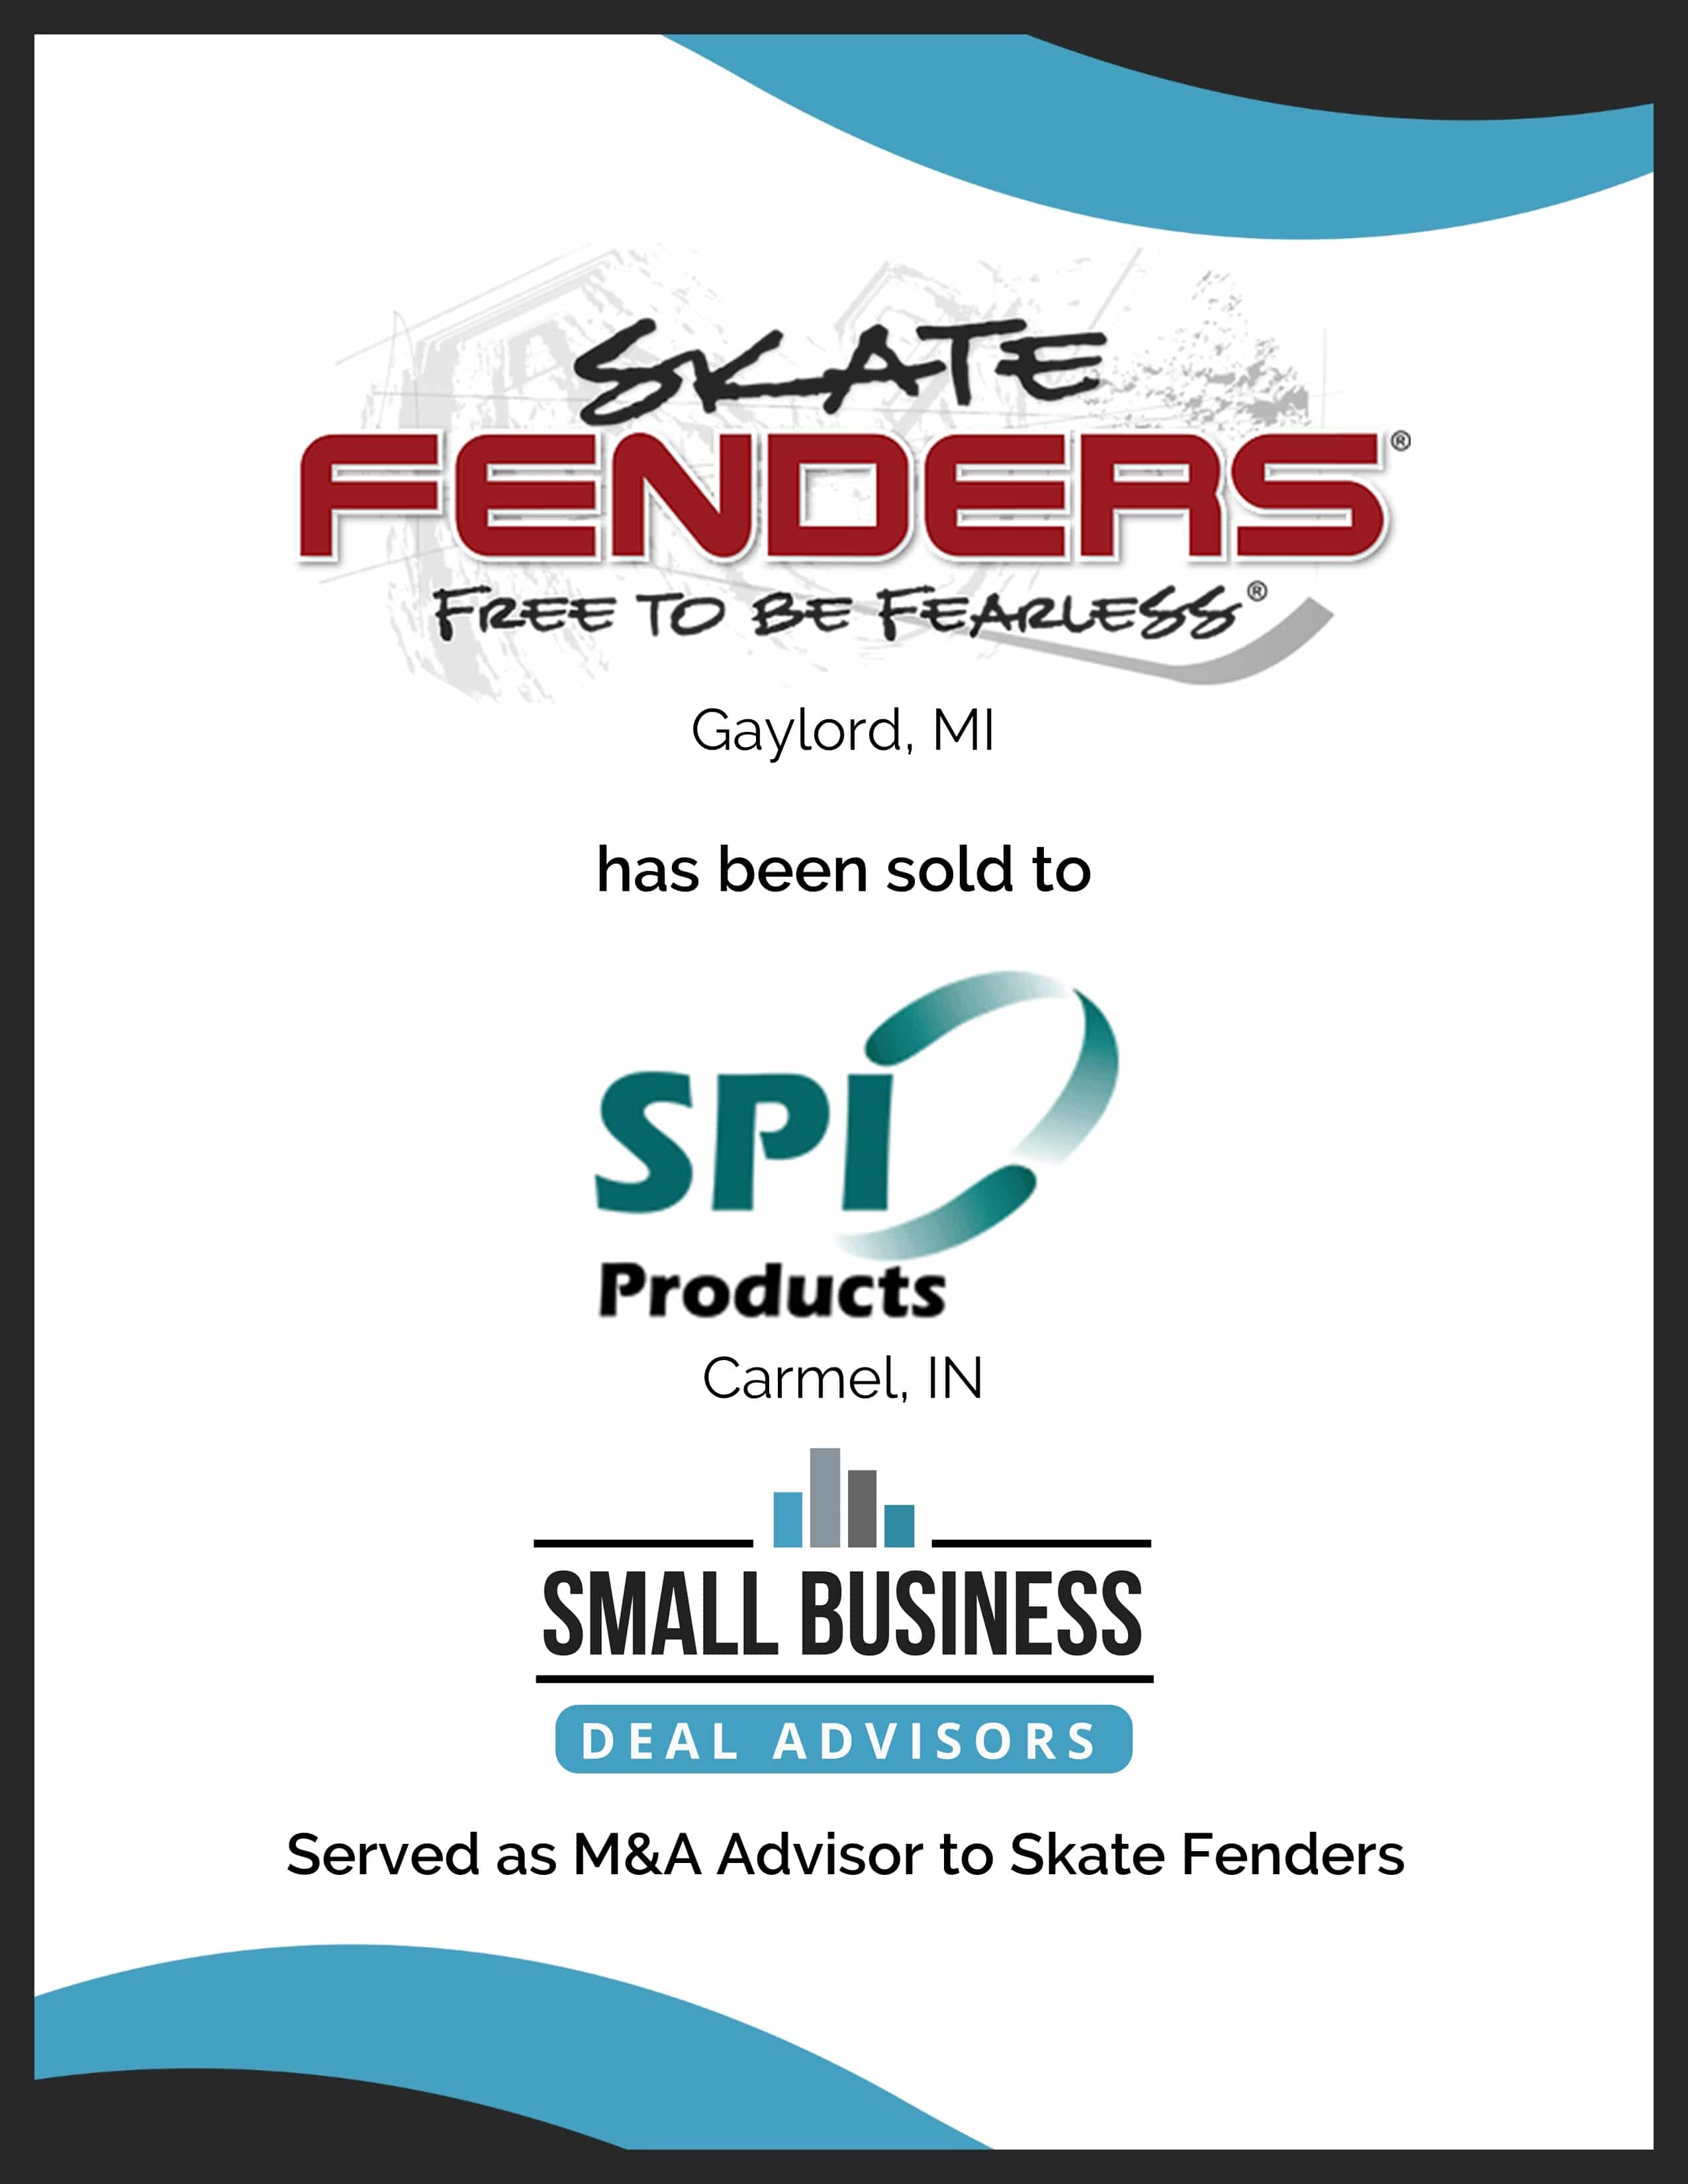 Skate Fenders has been sold to SPI Products